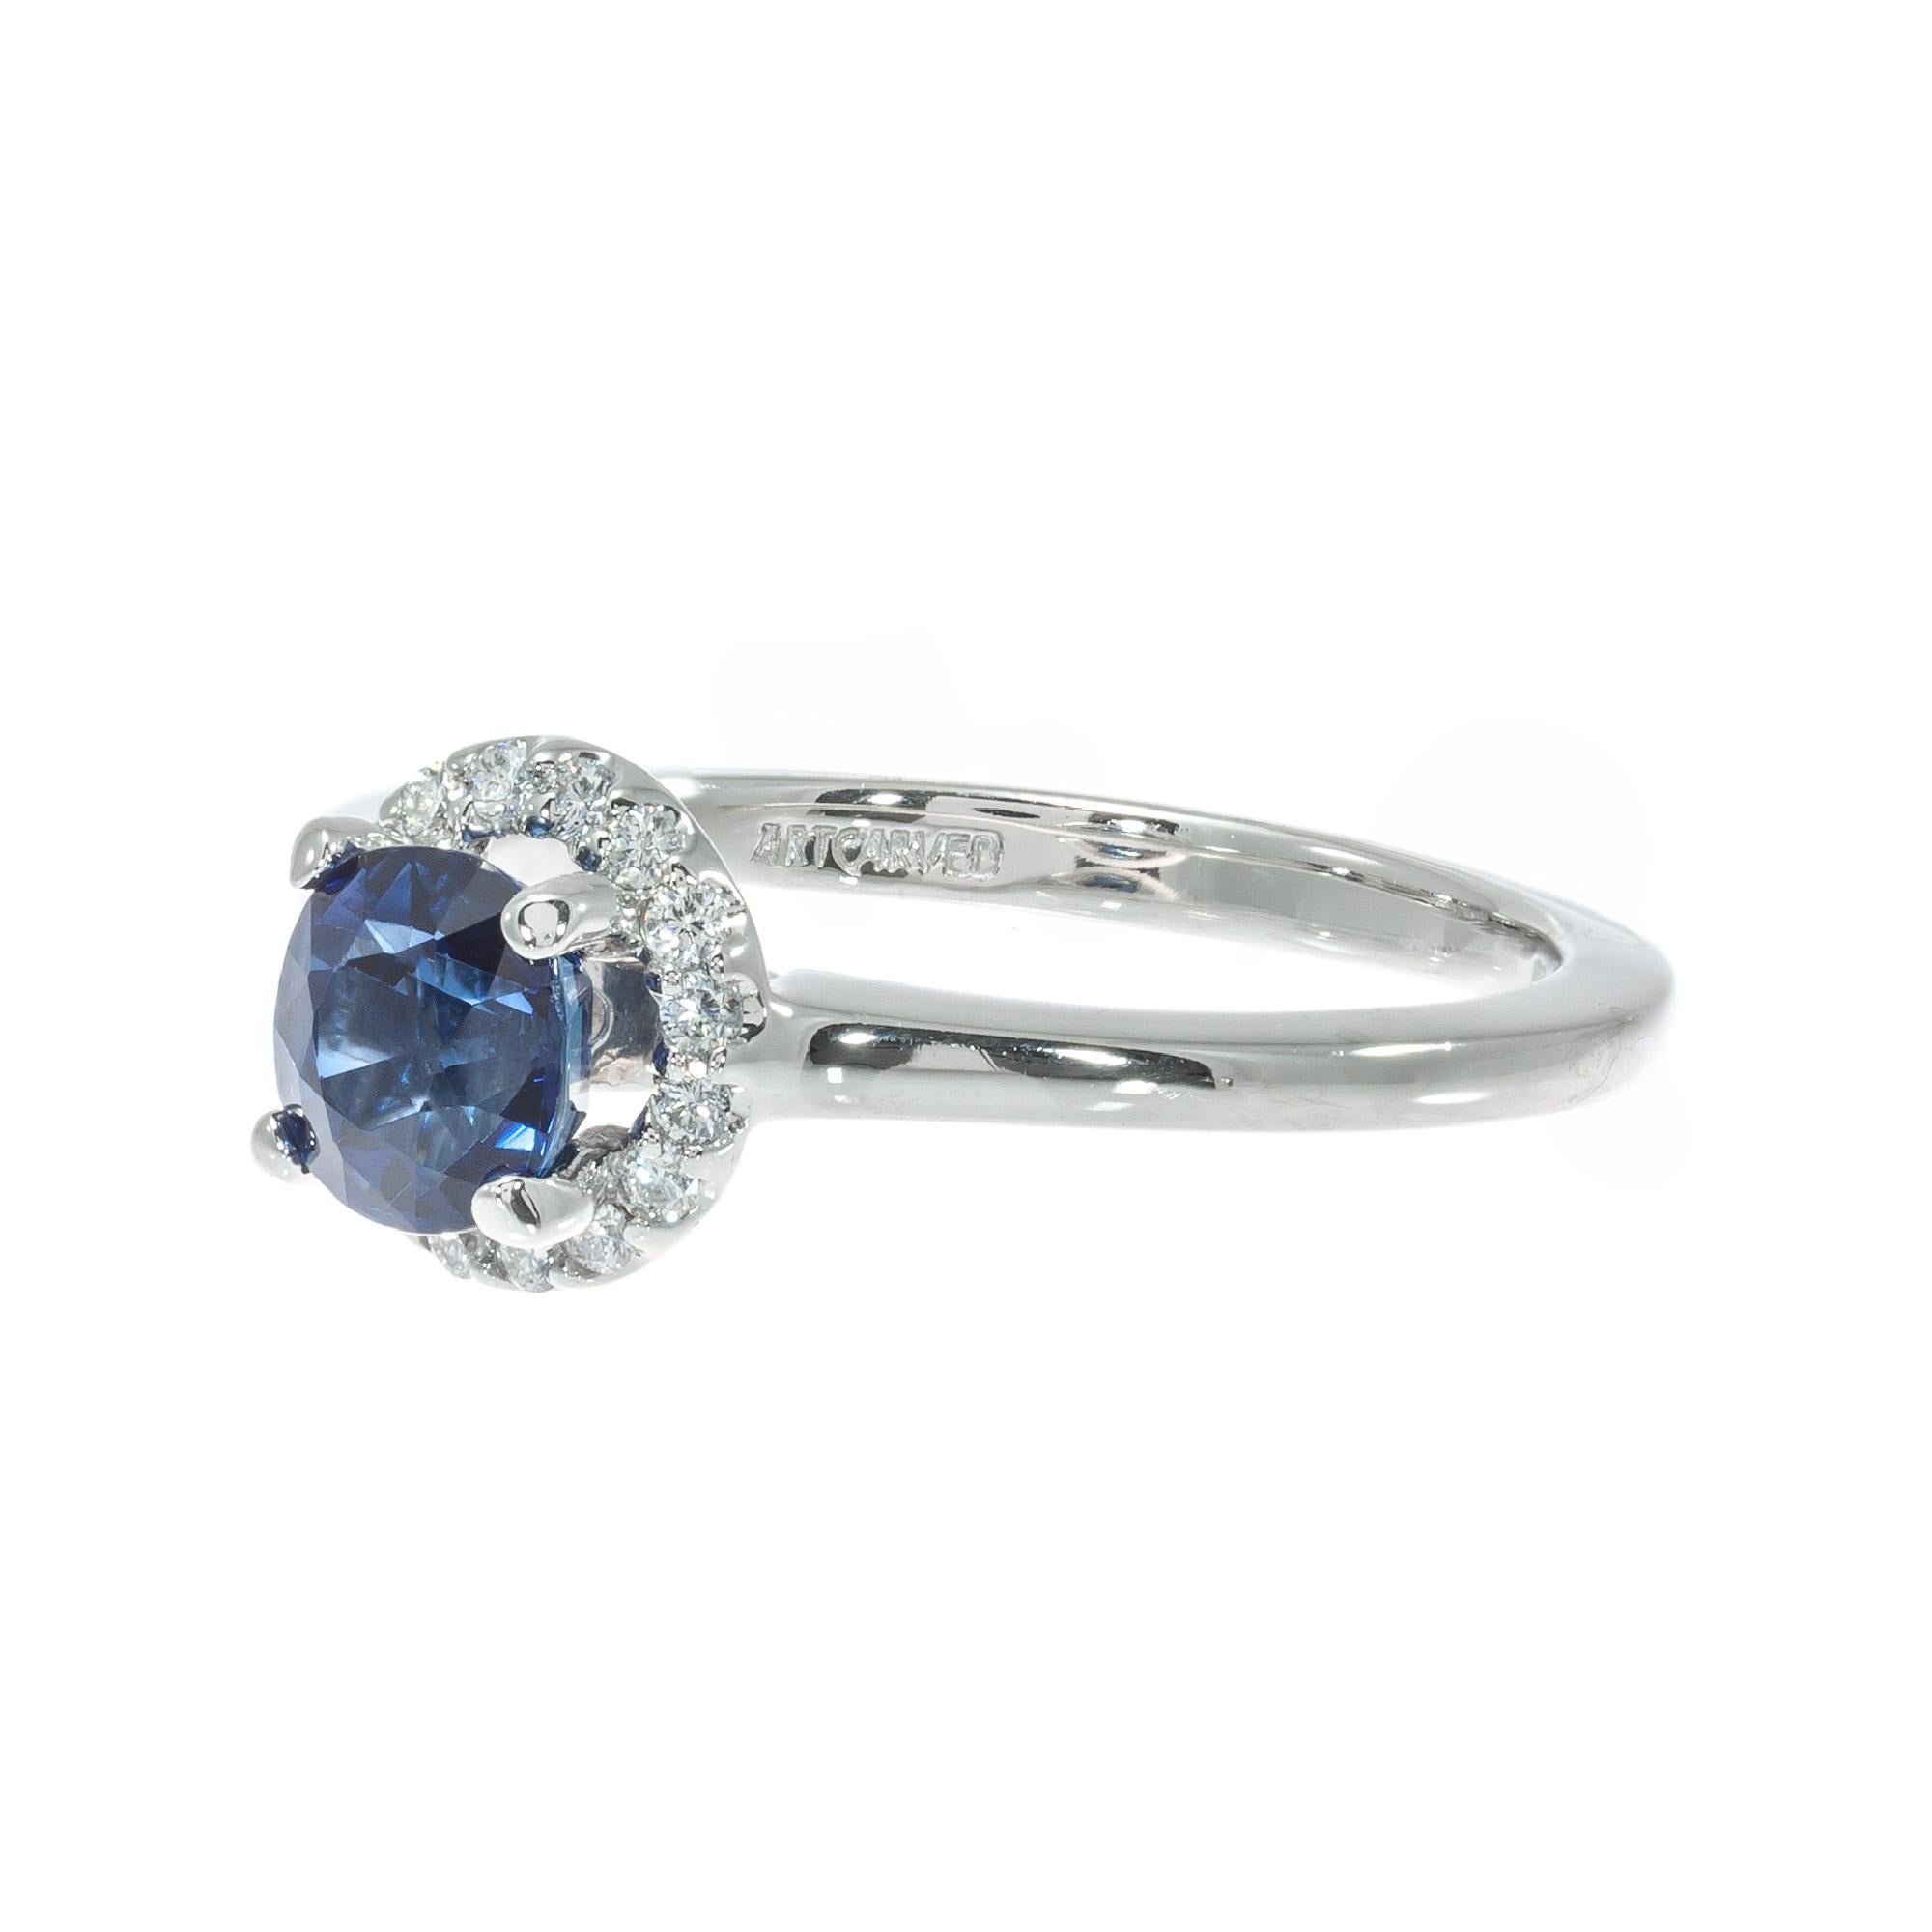 Peter Suchy GIA Certified 1.05 Carat Sapphire Diamond Platinum Engagement Ring In New Condition For Sale In Stamford, CT